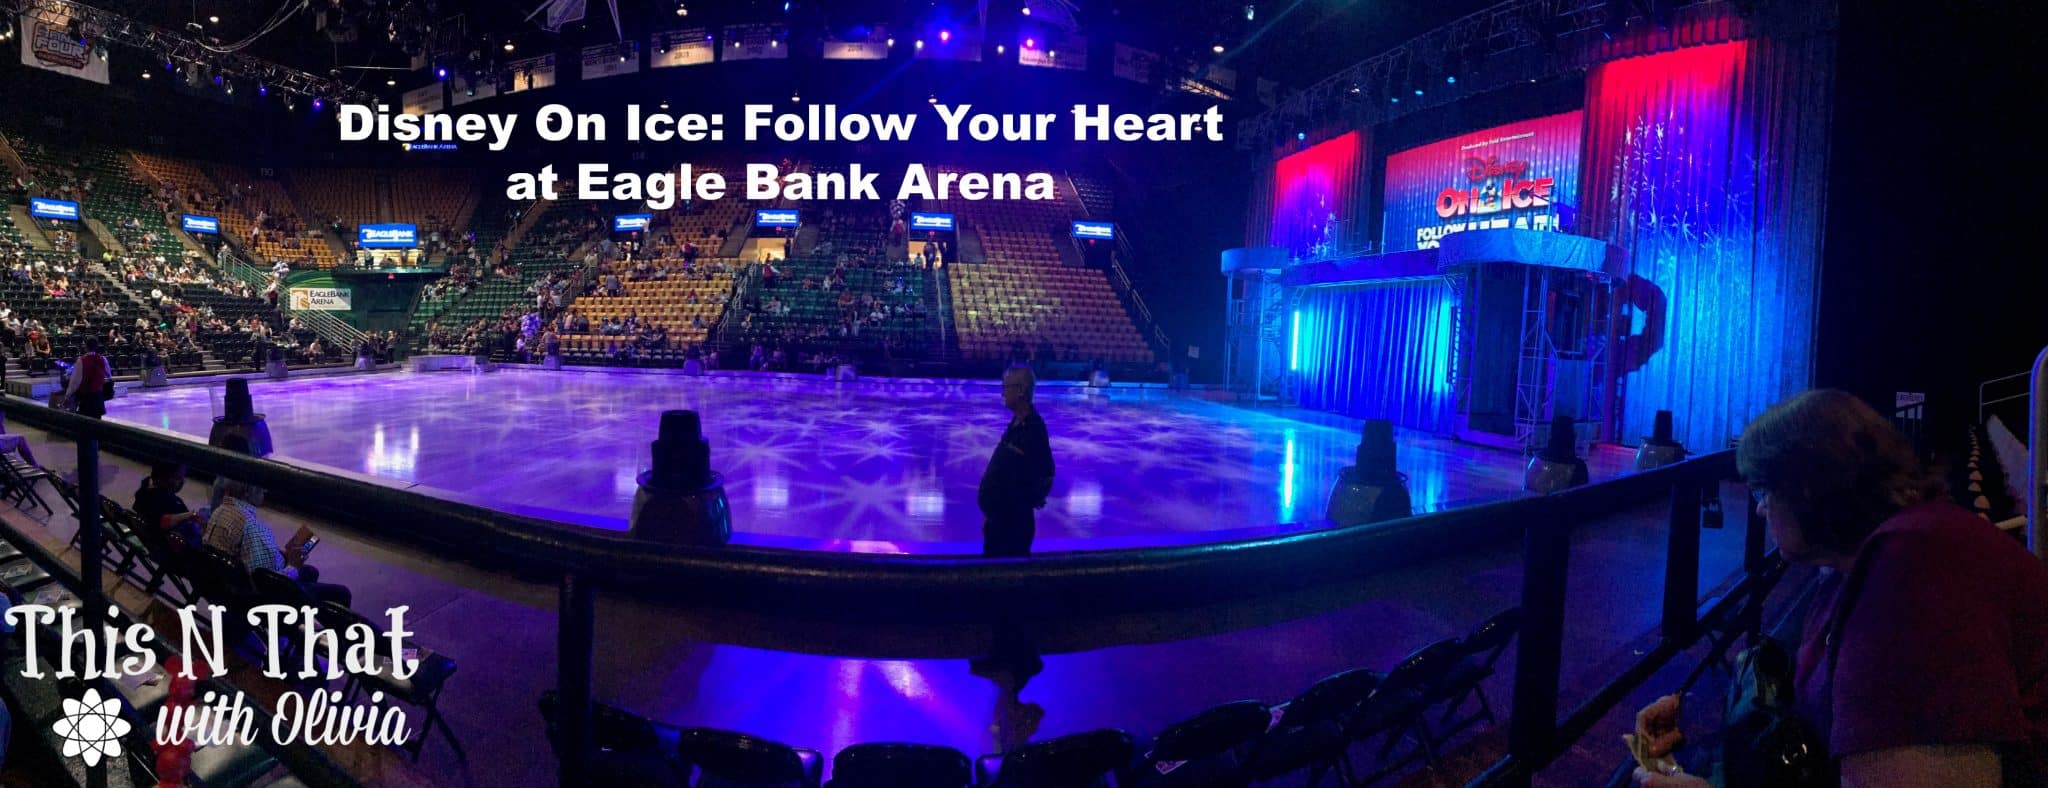 Disney On Ice: Follow Your Heart Experience | ThisNThatwithOlivia.com